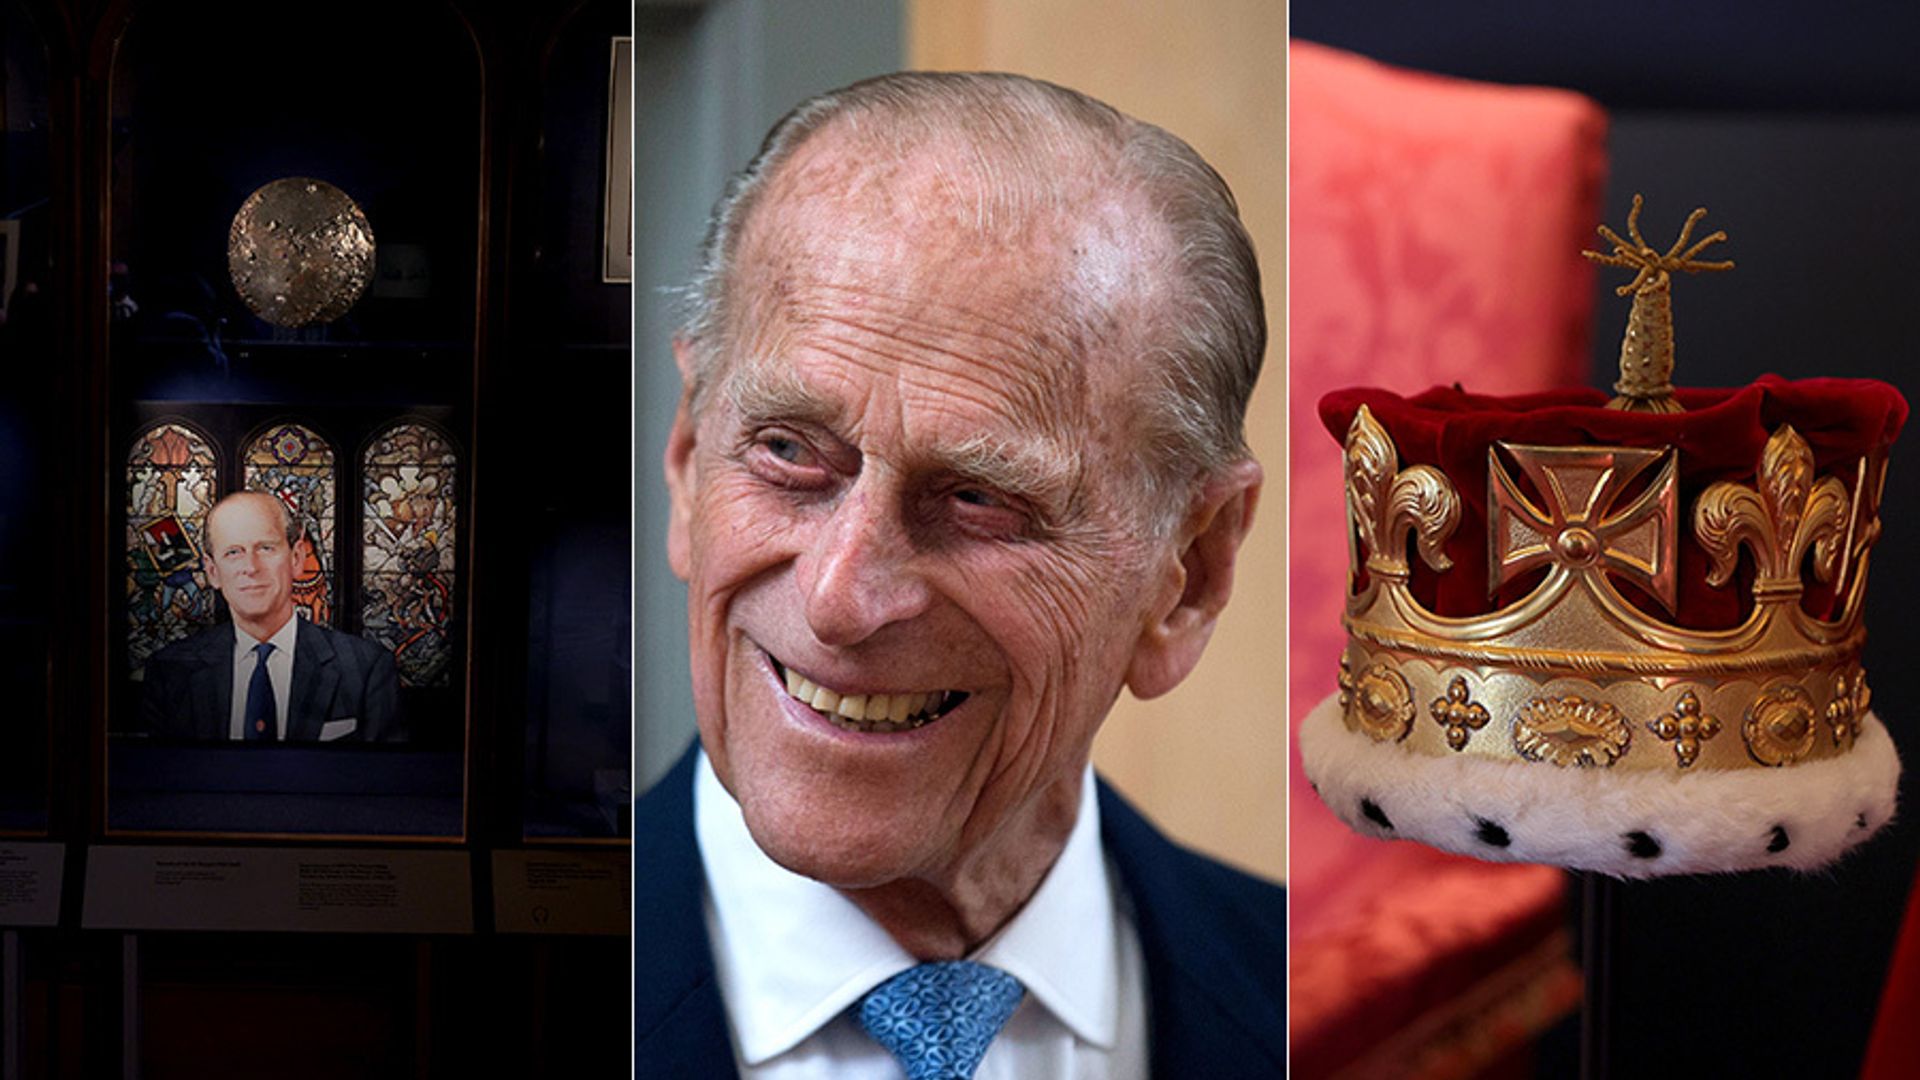 New exhibition dedicated to Prince Philip's life opens at Windsor Castle